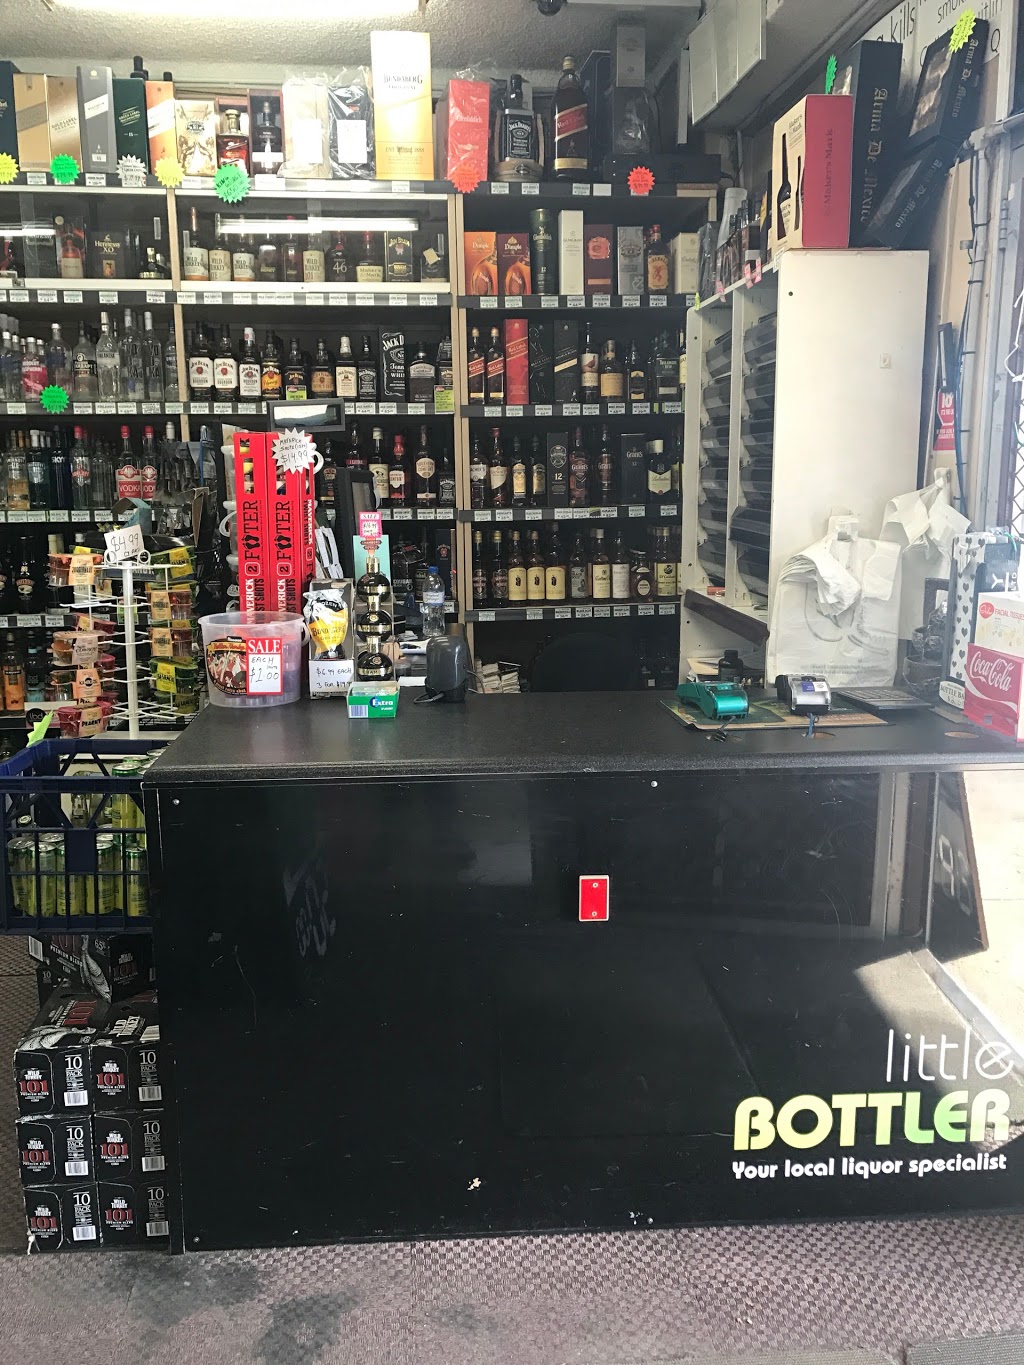 North St Mary Cellars (Little Bottler) | store | 1/7 Parklawn Pl, North St Marys NSW 2760, Australia | 0296234944 OR +61 2 9623 4944